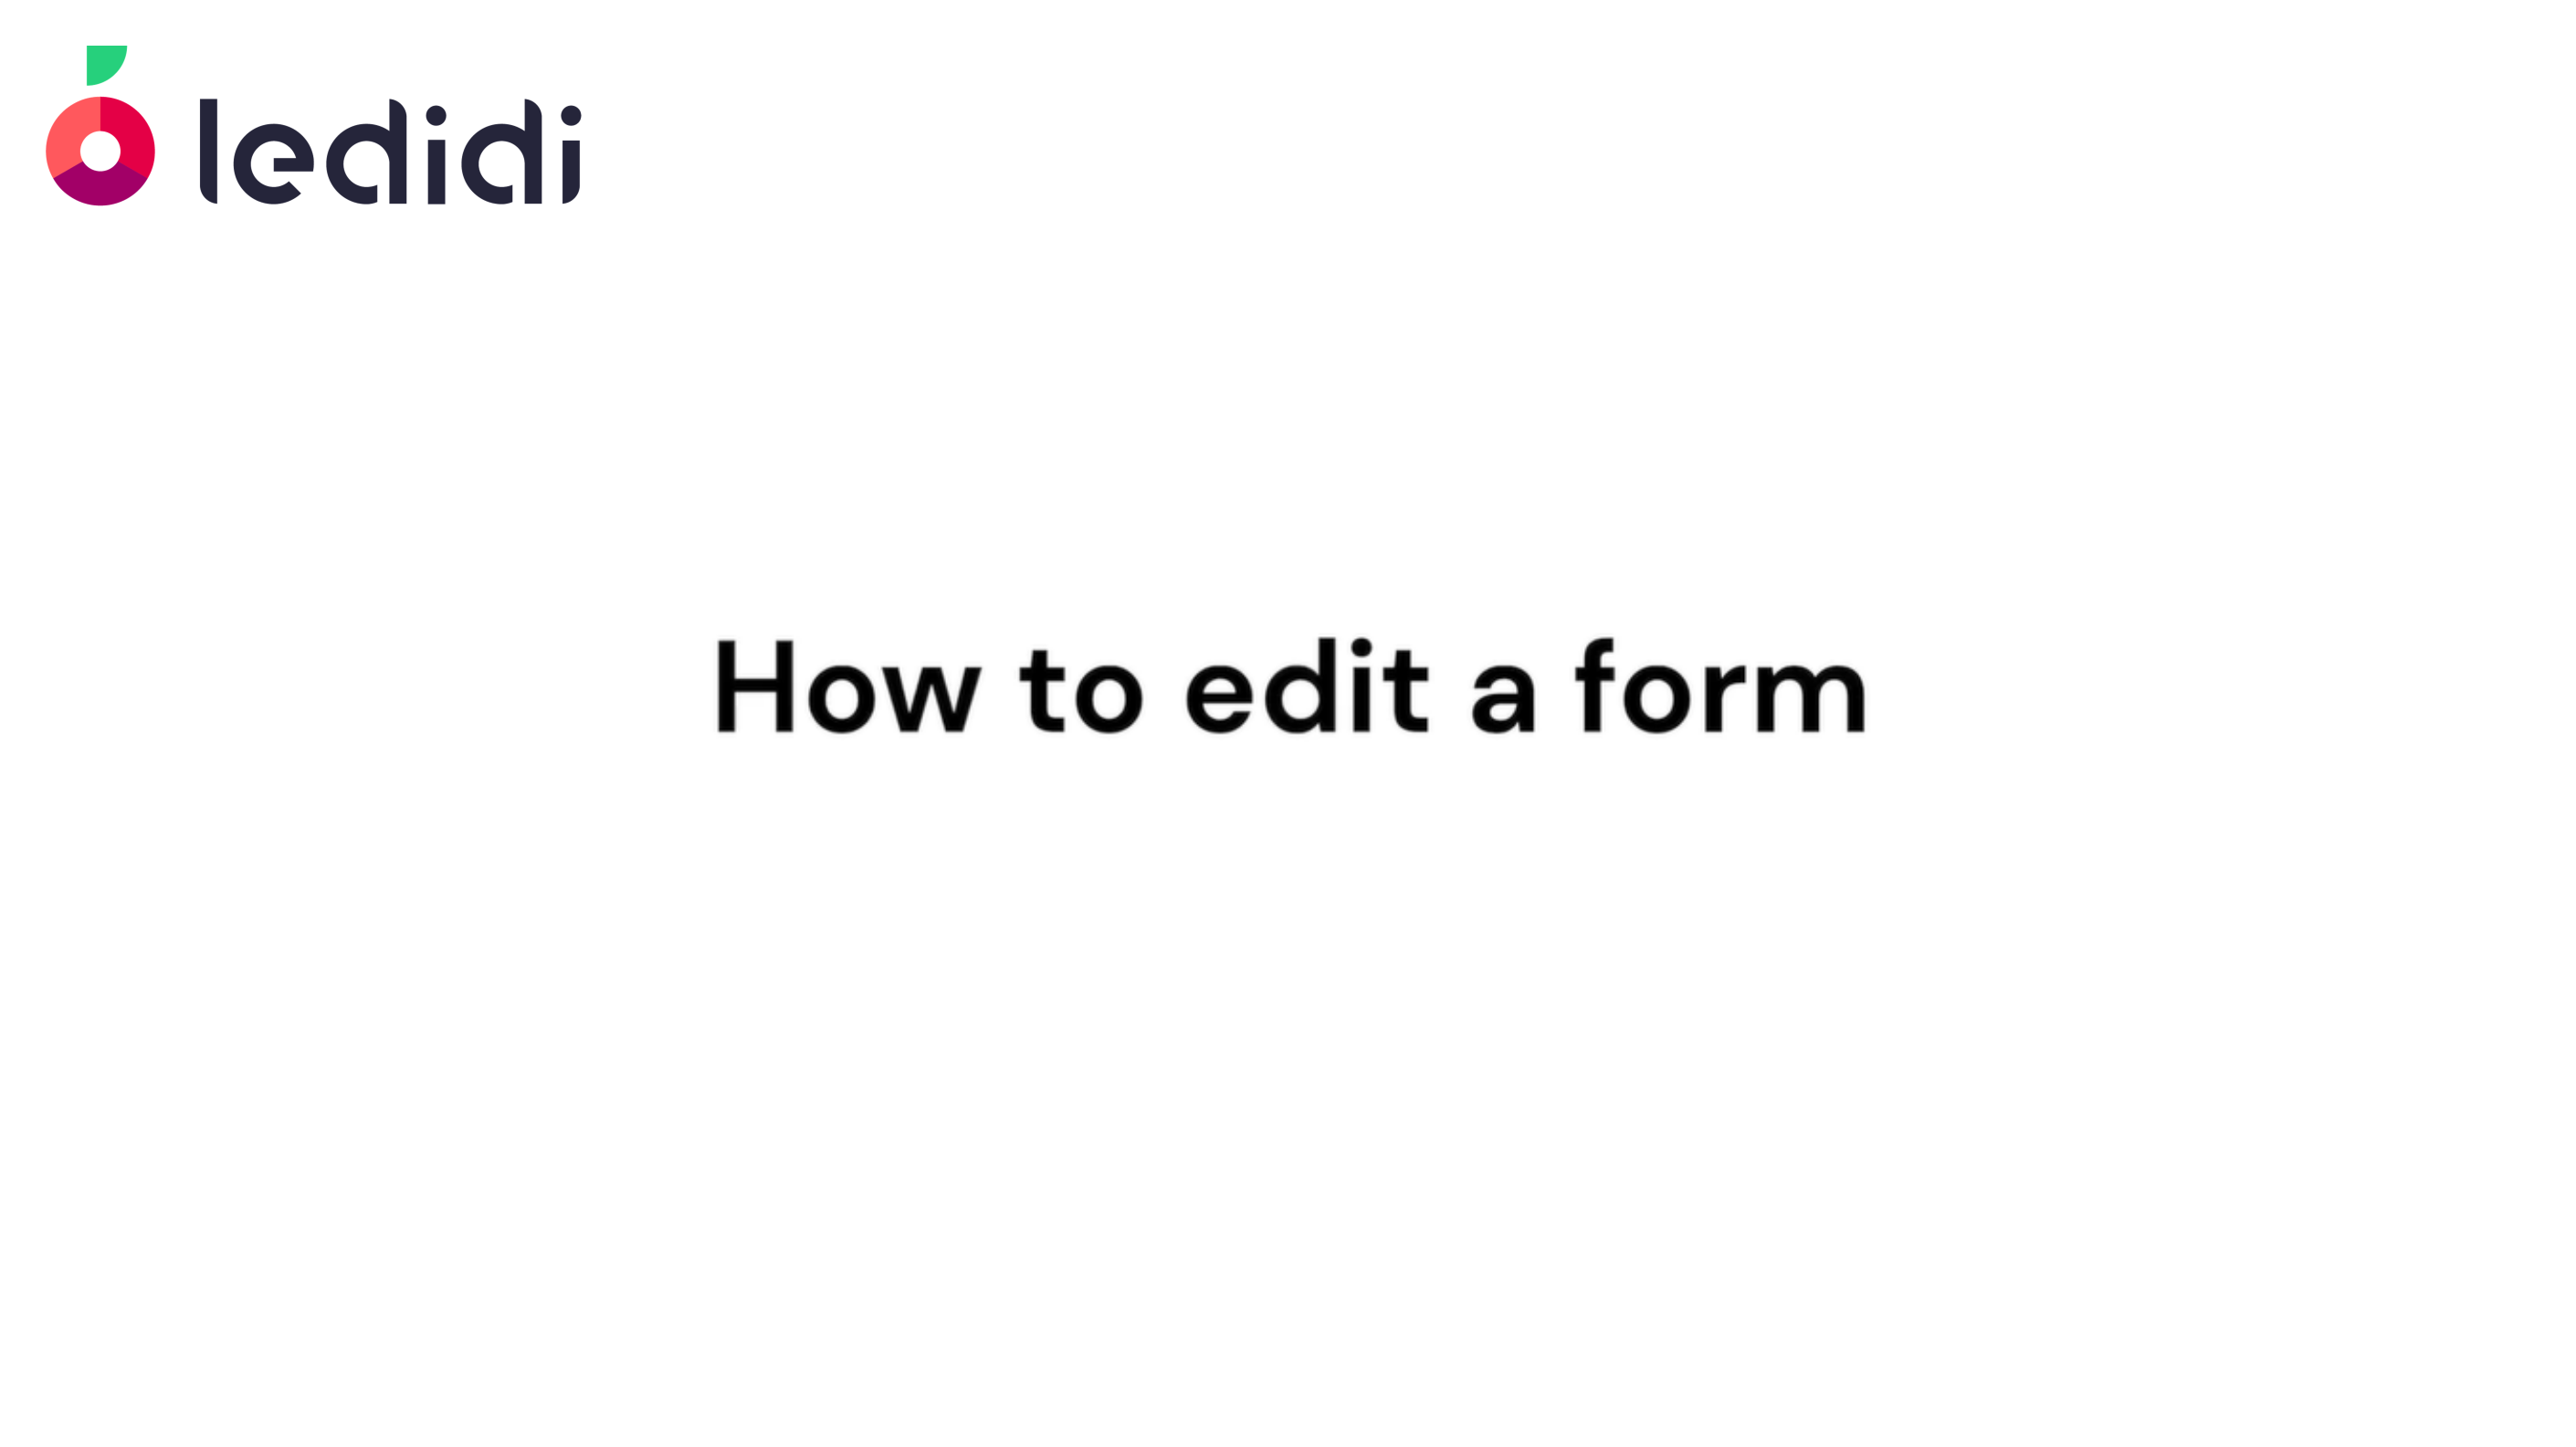 How to edit a form